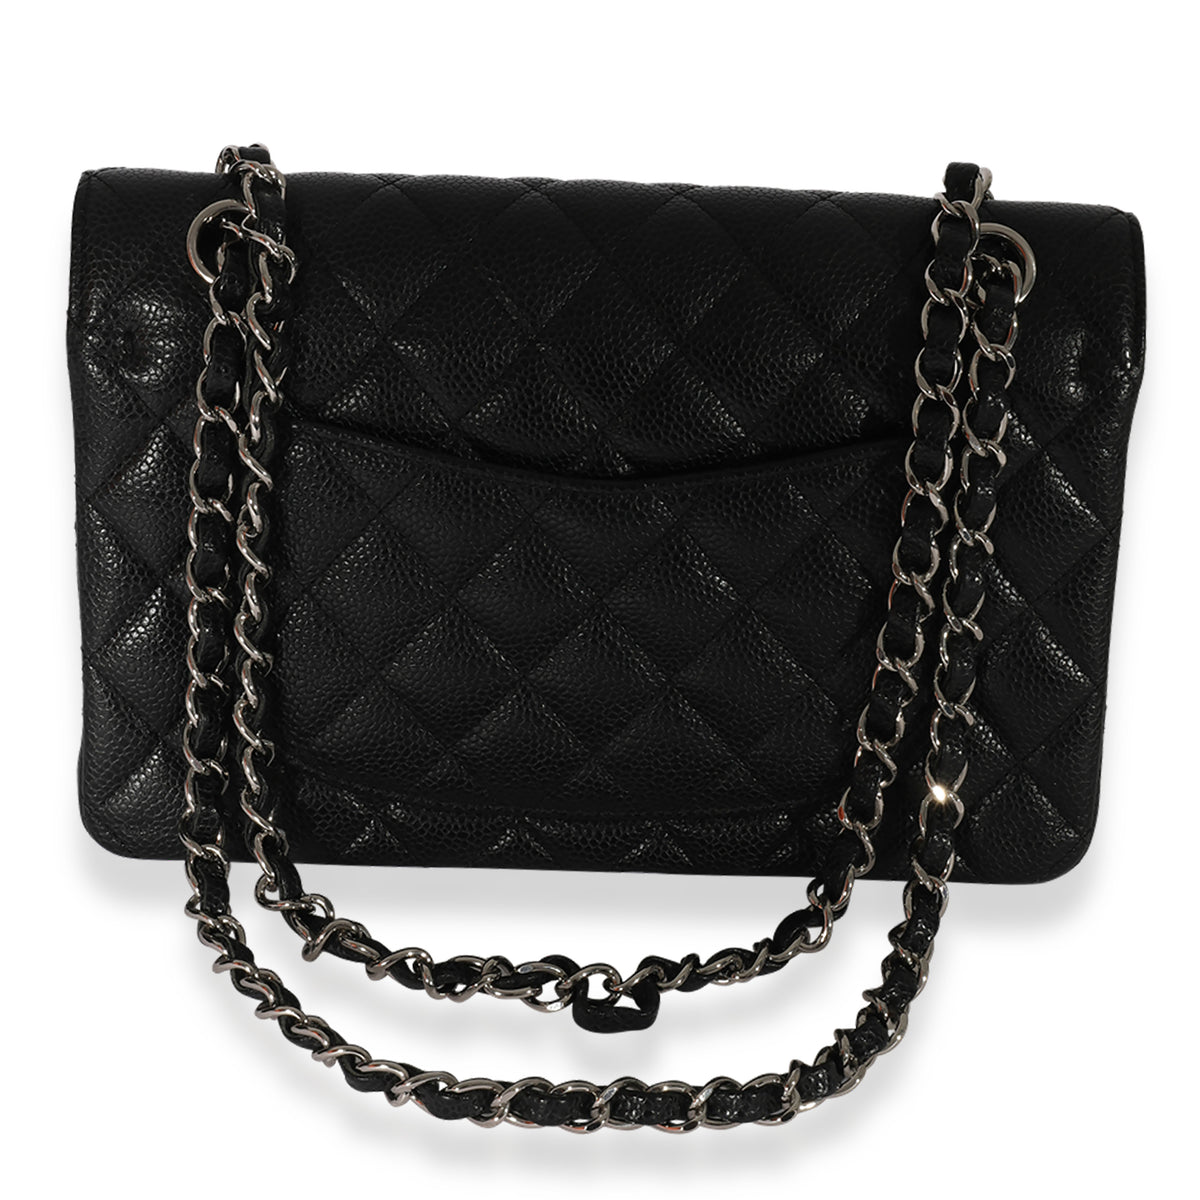 Chanel Black Quilted Caviar Small Classic Flap Bag, myGemma, SG